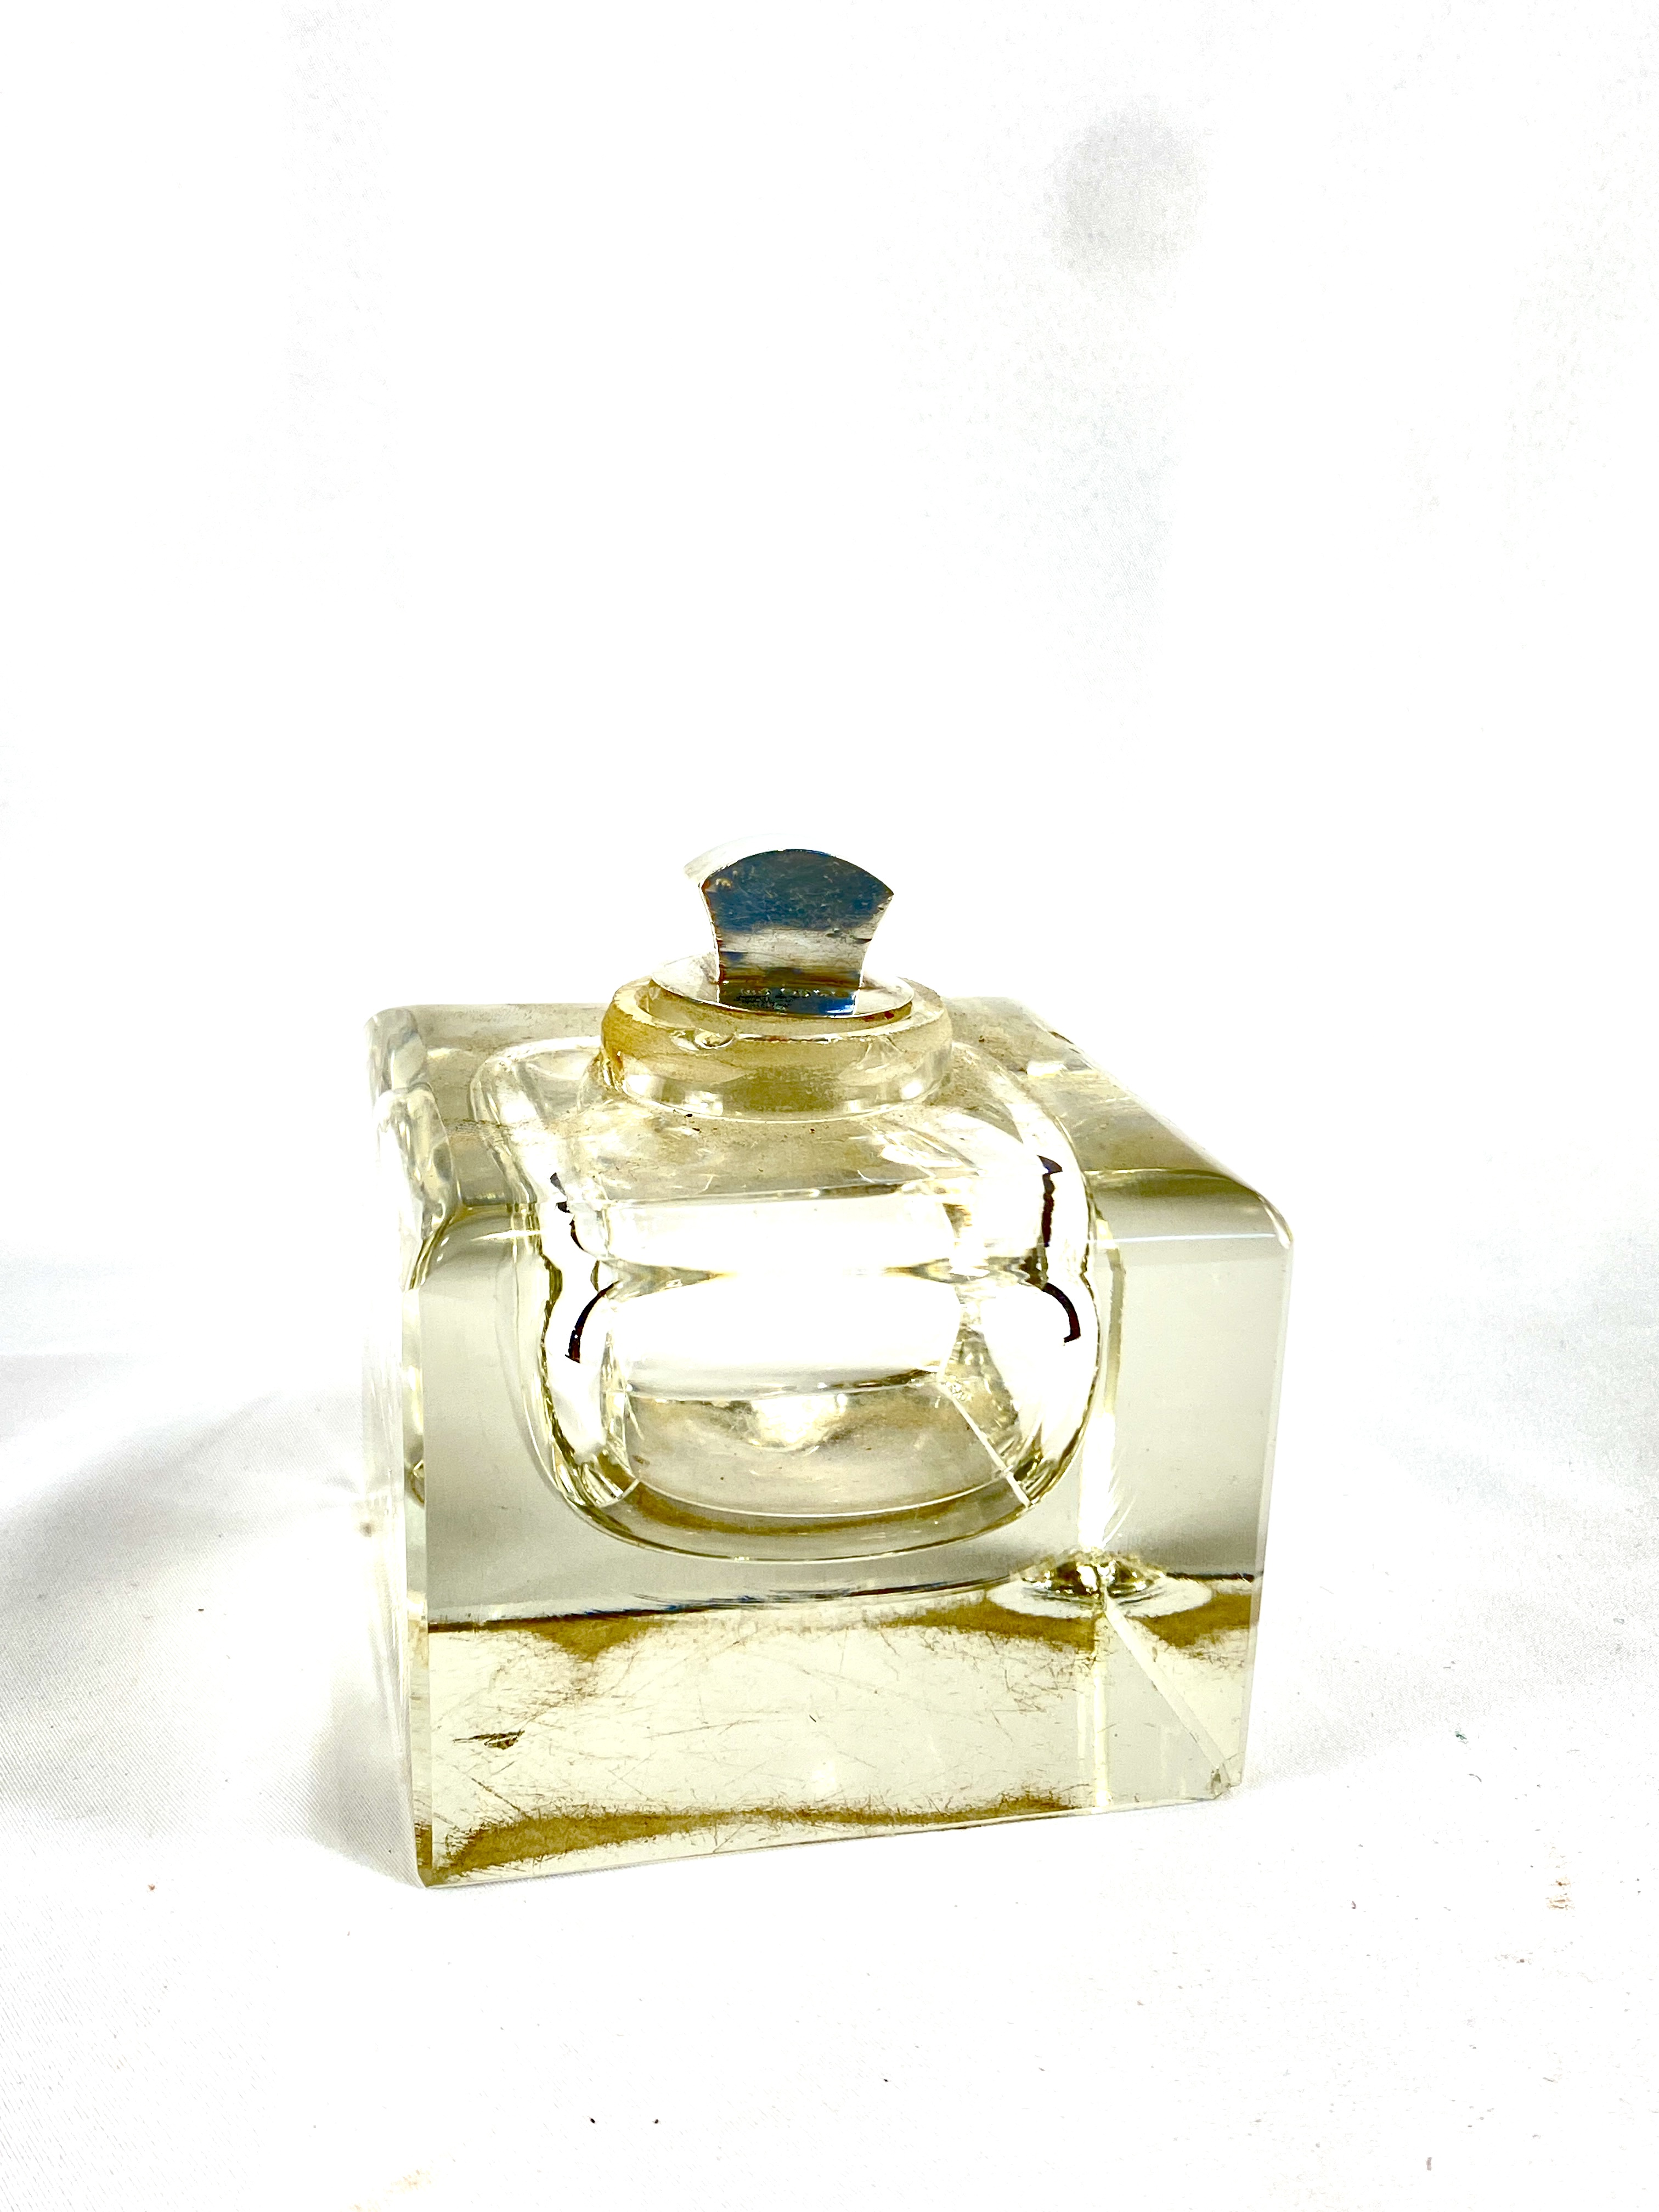 Glass inkwell with silver collar - Image 4 of 4